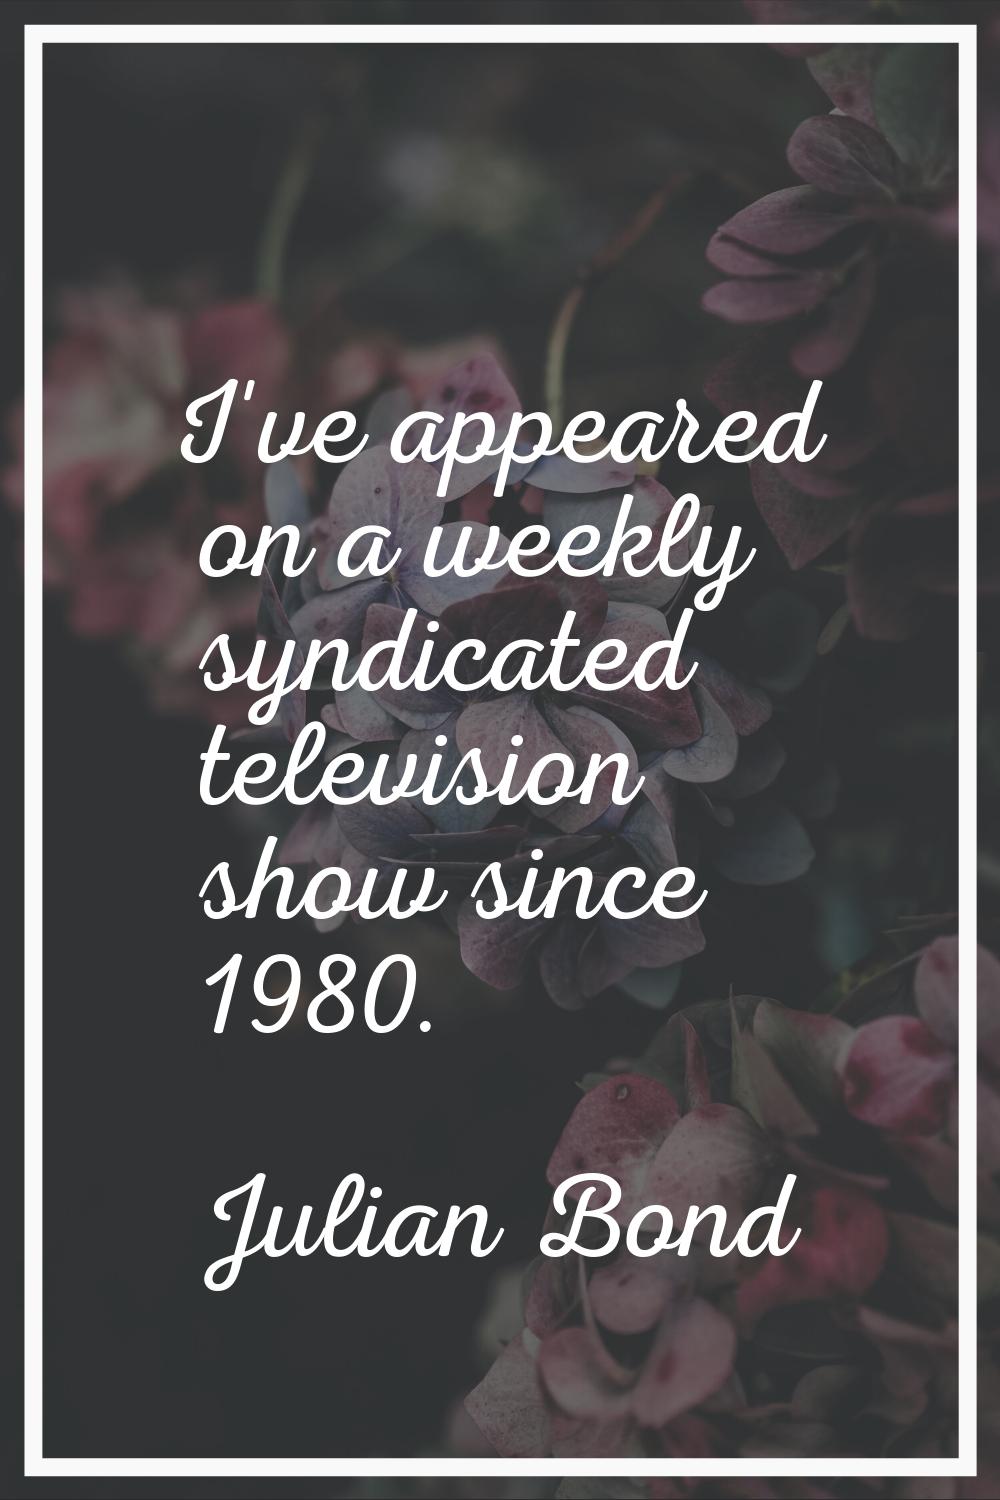 I've appeared on a weekly syndicated television show since 1980.